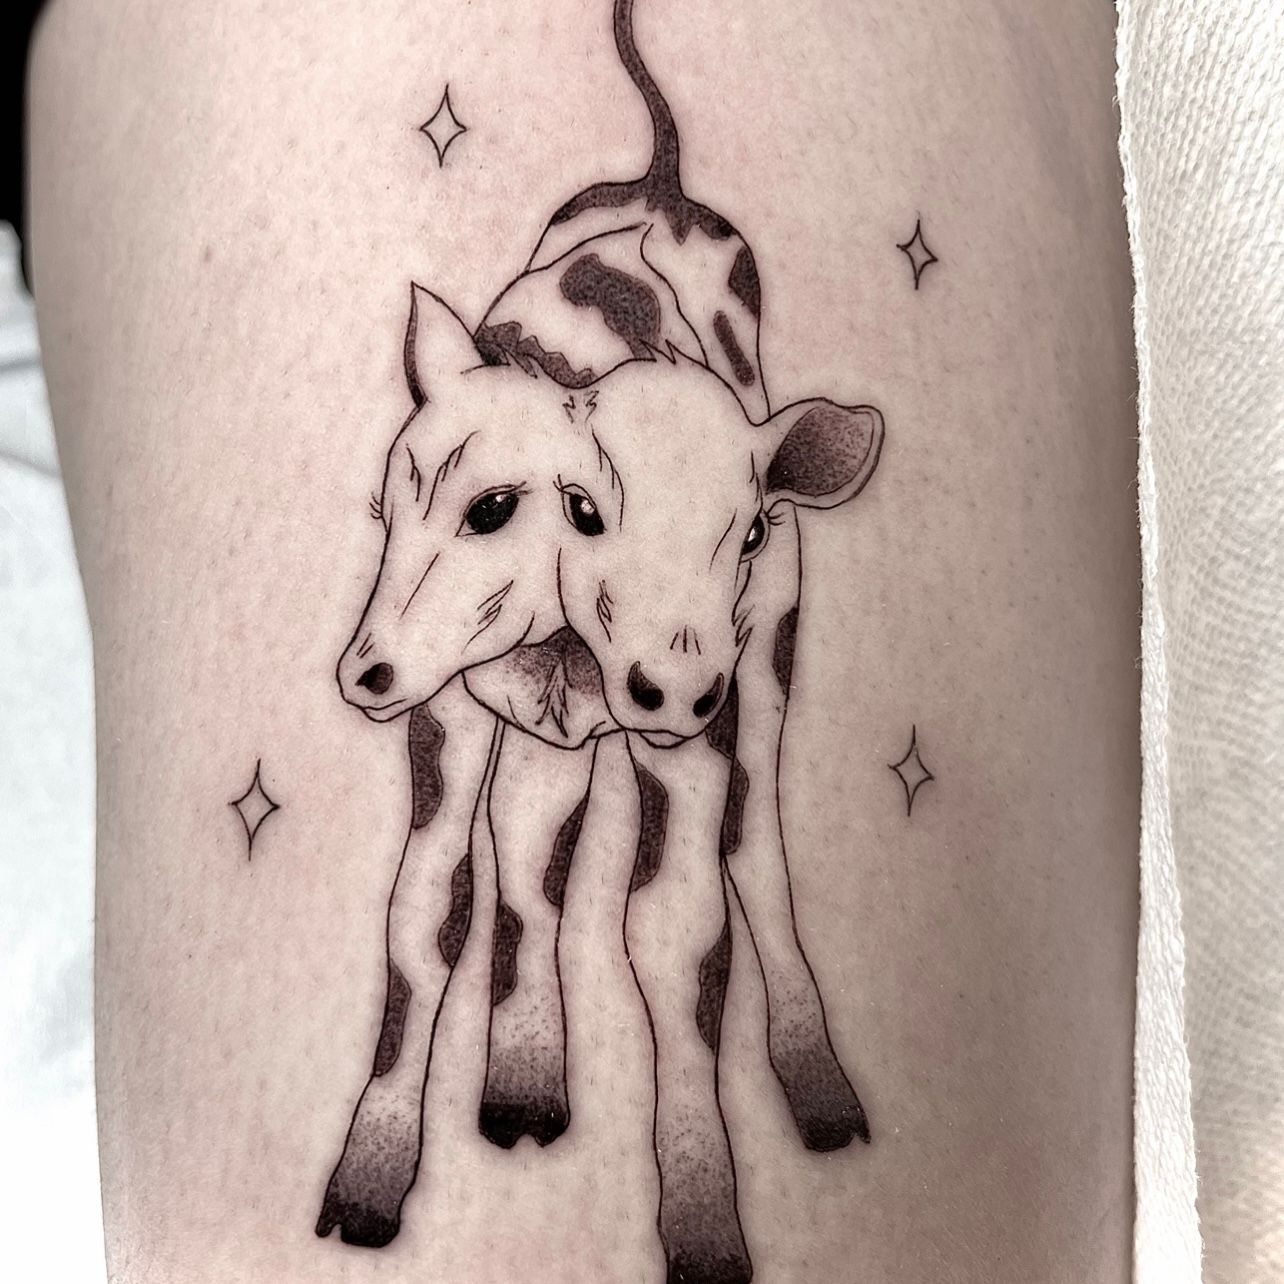 Two headed lamb details made with a single cosmetic tattooing needle Was  really happy with how those fine lines held up during healing  Instagram